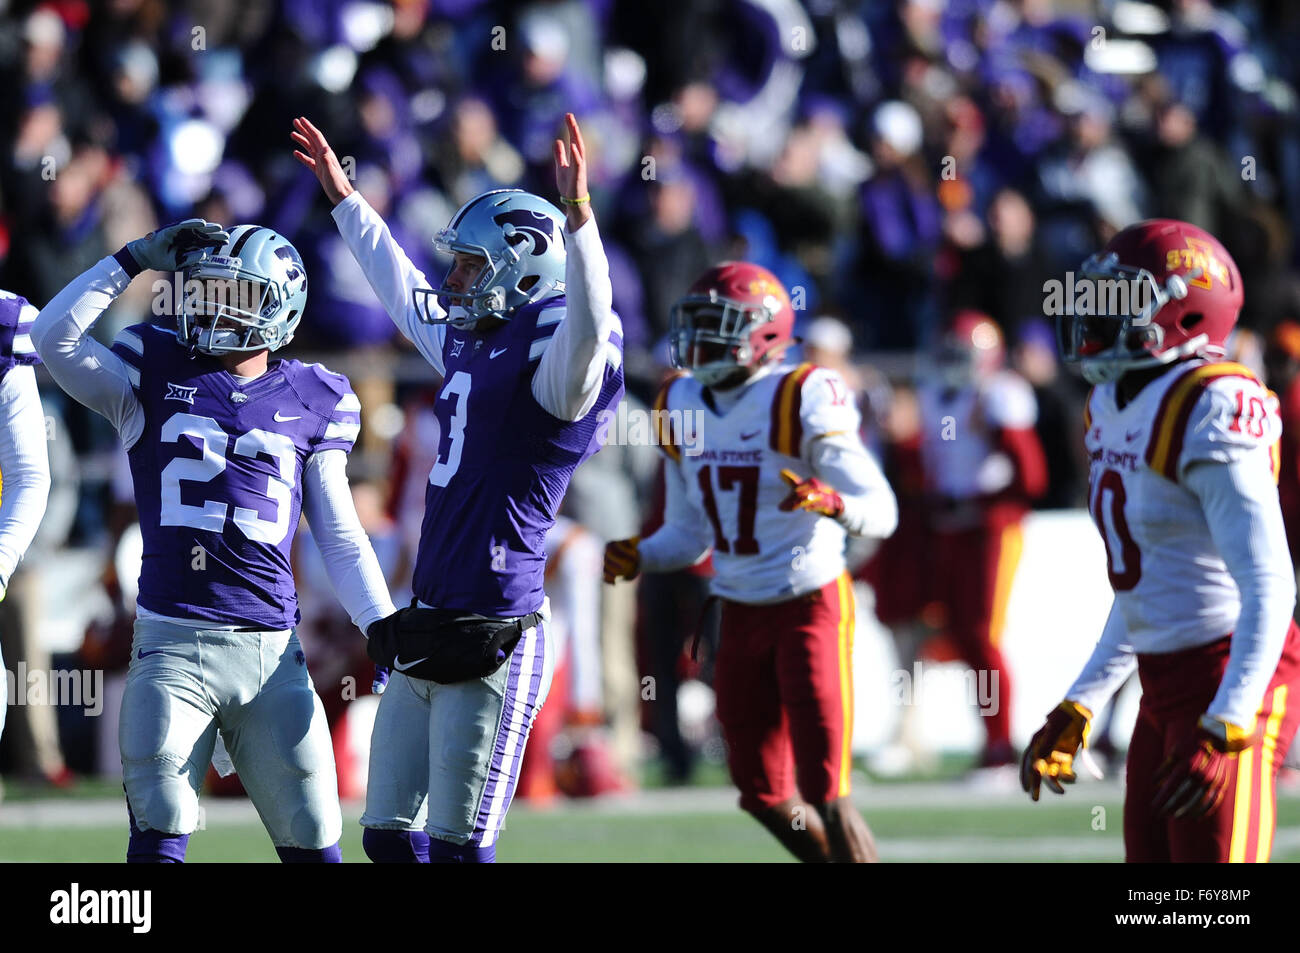 Manhattan, Kansas, USA. 21st Nov, 2015. Everyone looks up to see the winning 42 yrd.field goal by Kansas State Wildcats place kicker Jack Cantele (3) to win the game for Kansas State 38-35 after being behind 21 points in the game during the NCAA Football game between the Iowa State Cyclones and the Kansas State Wildcats at Bill Snyder Family Stadium in Manhattan, Kansas. Kendall Shaw/CSM/Alamy Live News Stock Photo